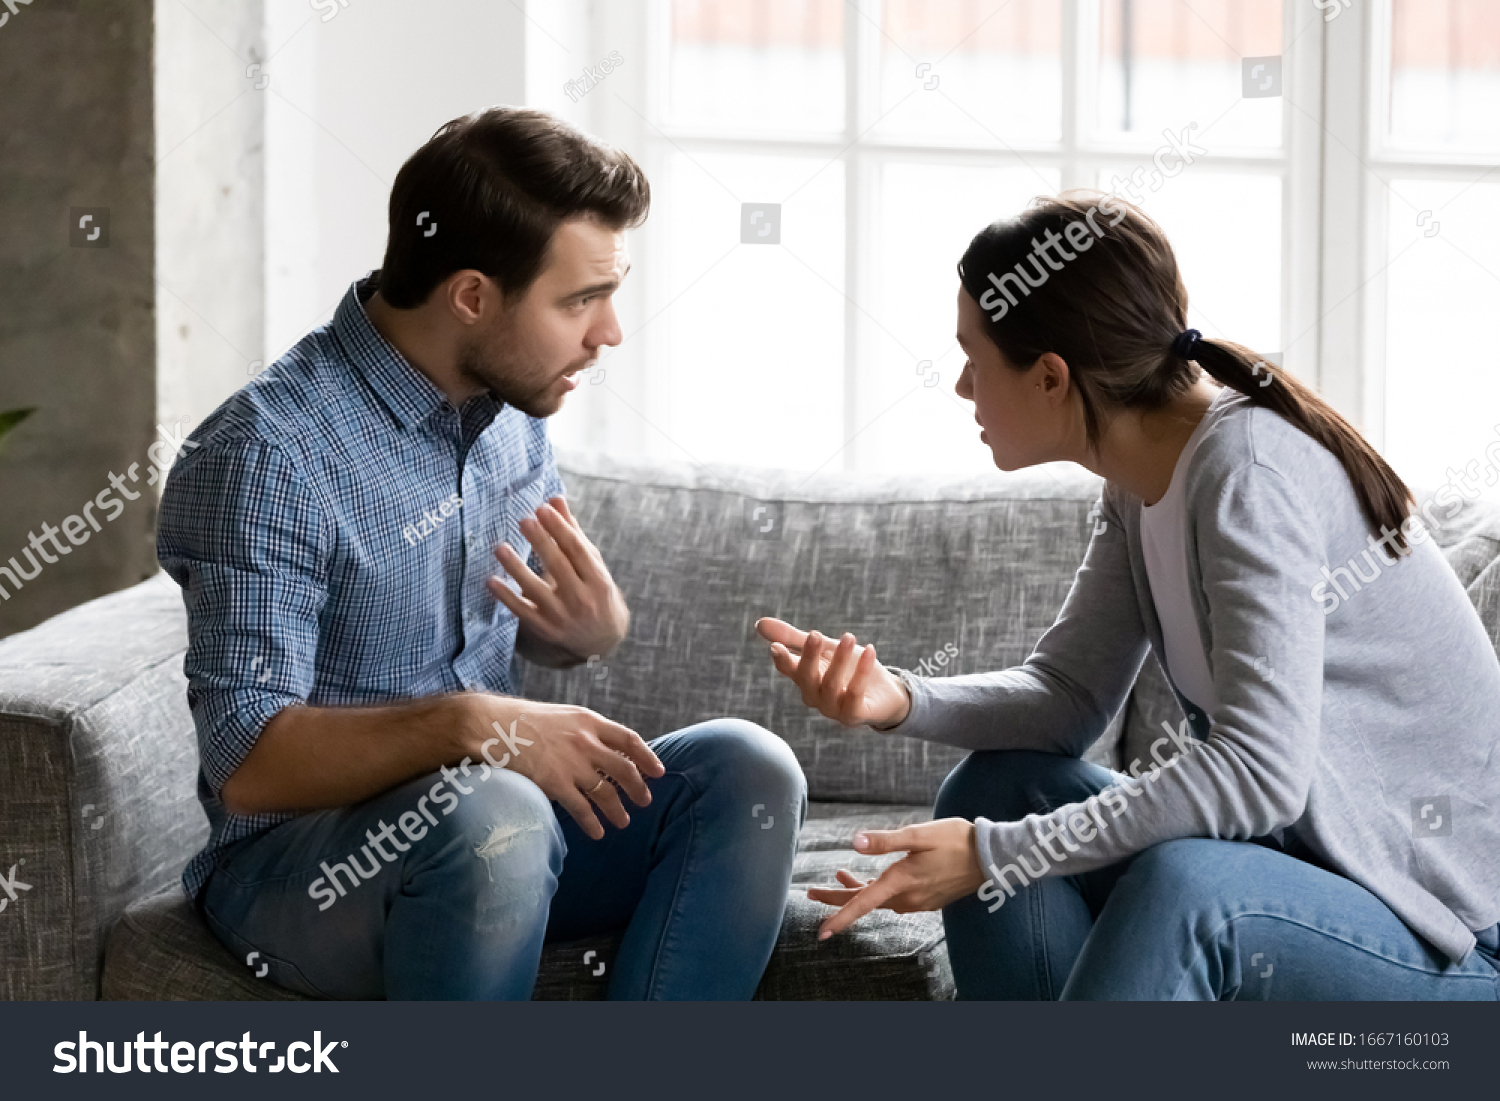 Stressed young married family couple arguing emotionally, blaming lecturing each other, sitting on couch. Depressed husband quarreling with wife, having serious relations communication problems. #1667160103